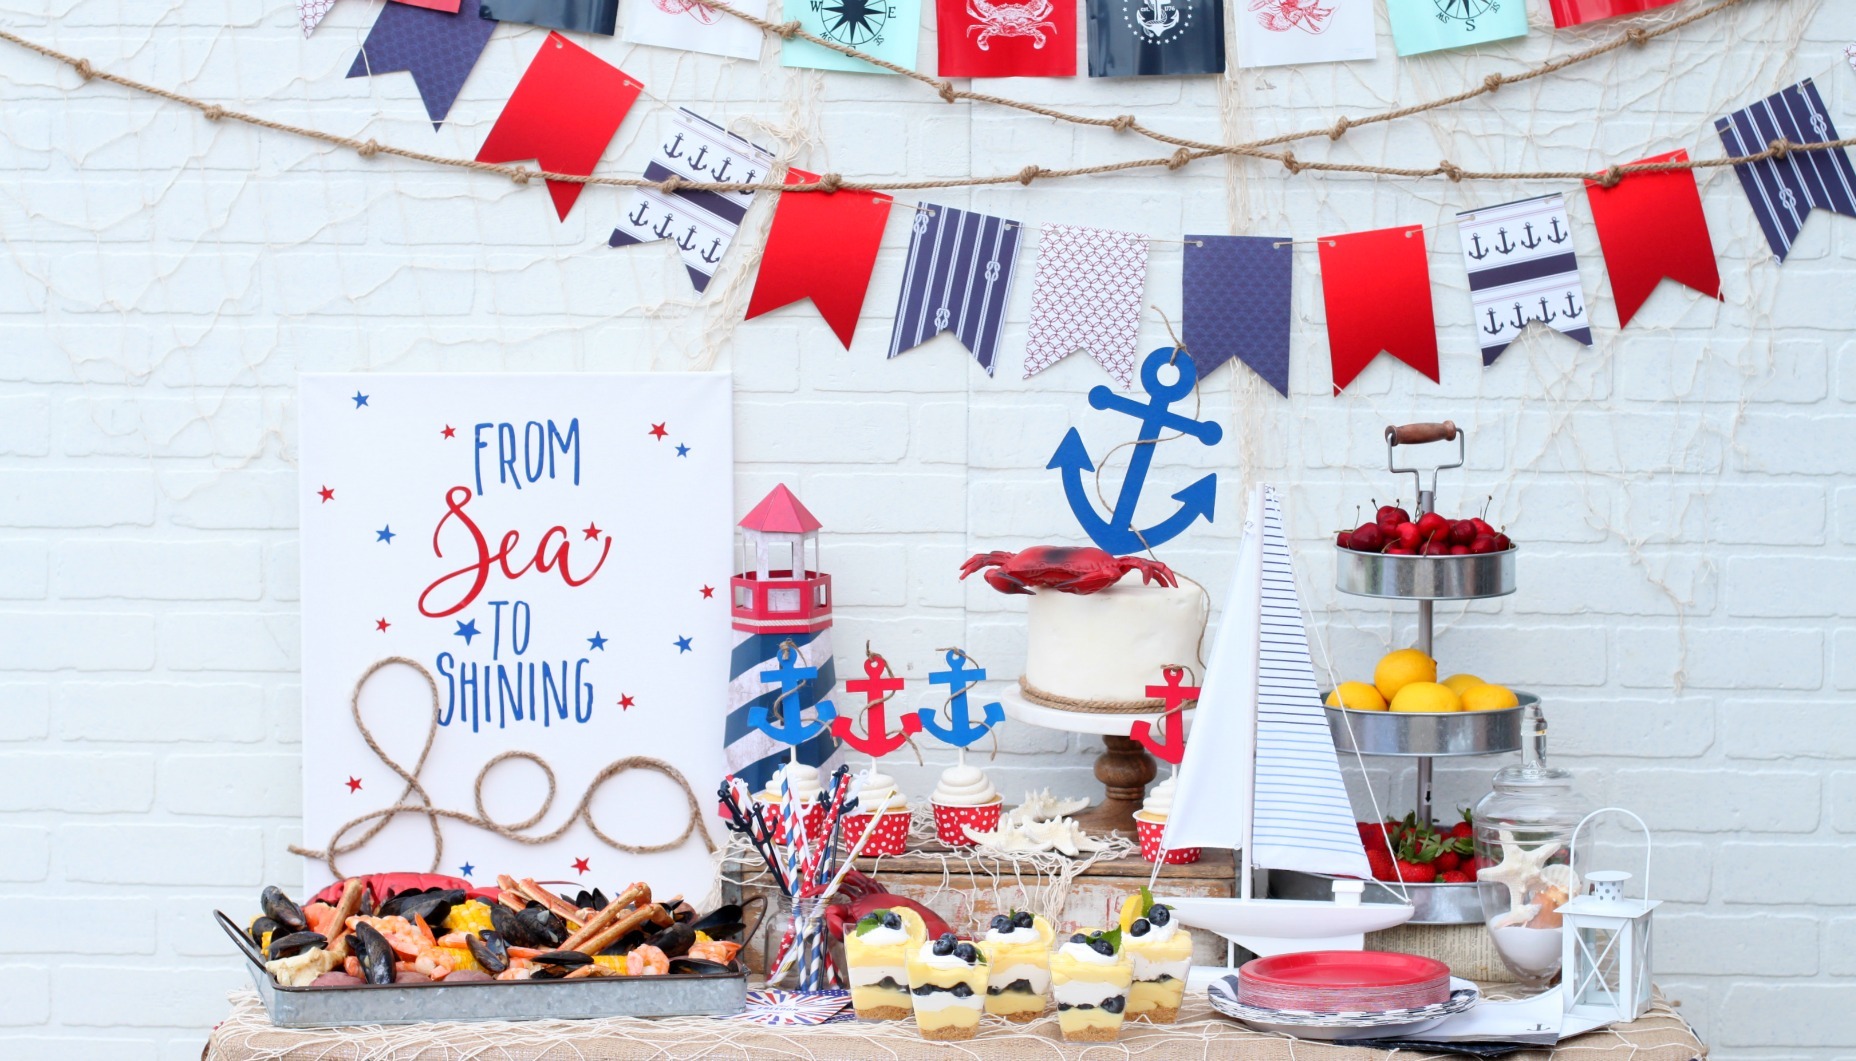 From Sea to Shining Sea Themed 4th of July Party - Inspired By This